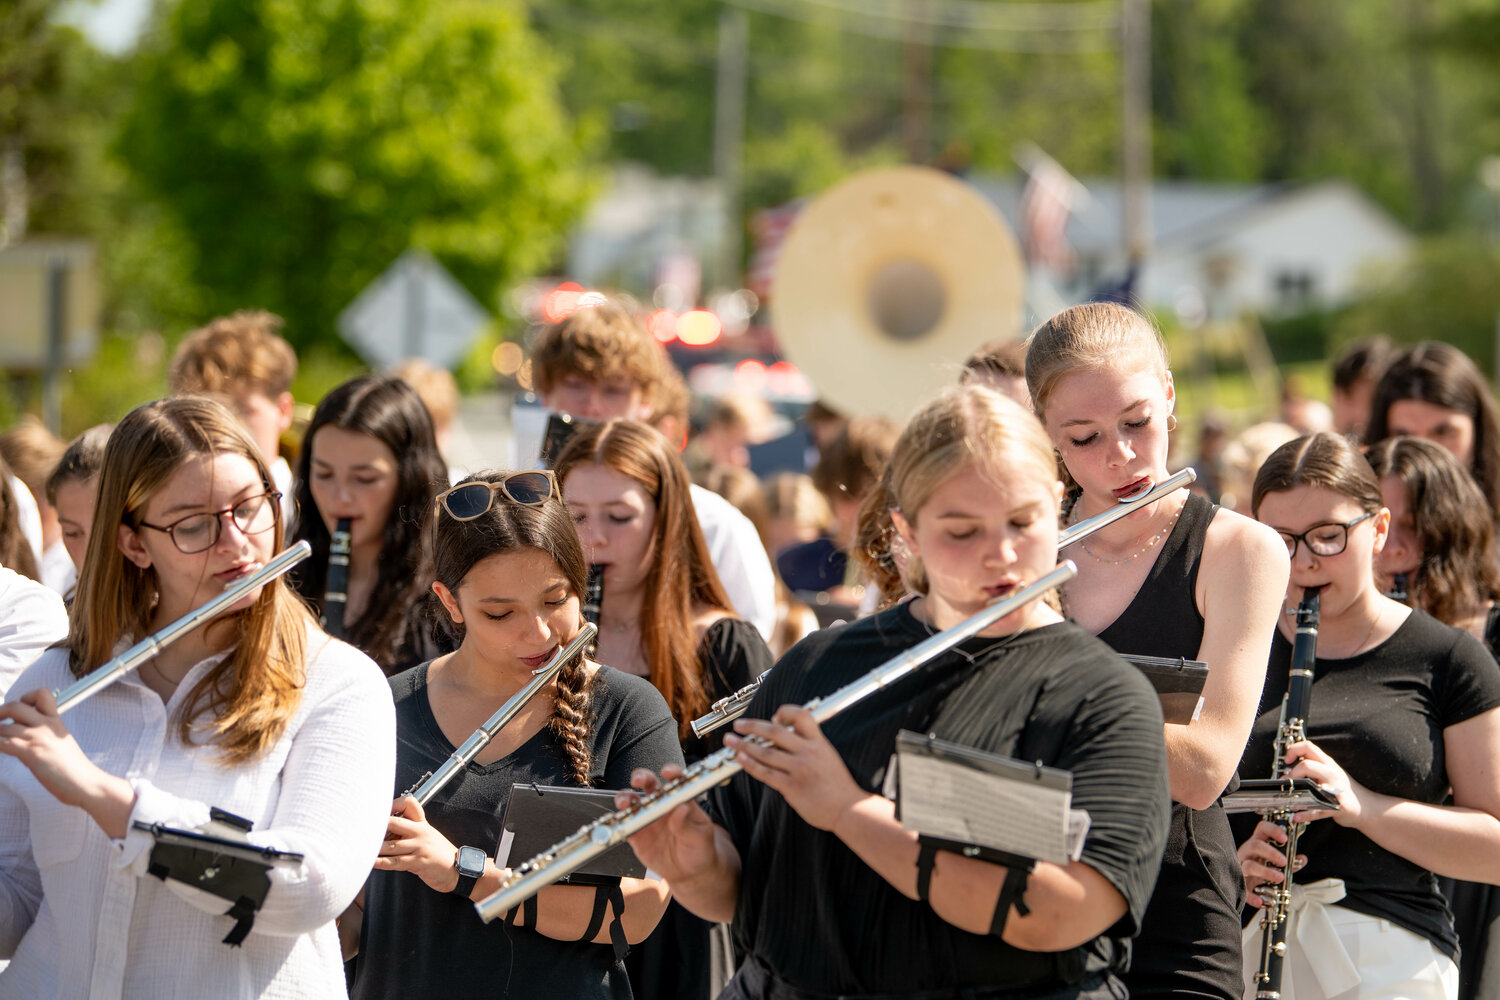 Members of the Sullivan West band brought their musical talents to the parade.